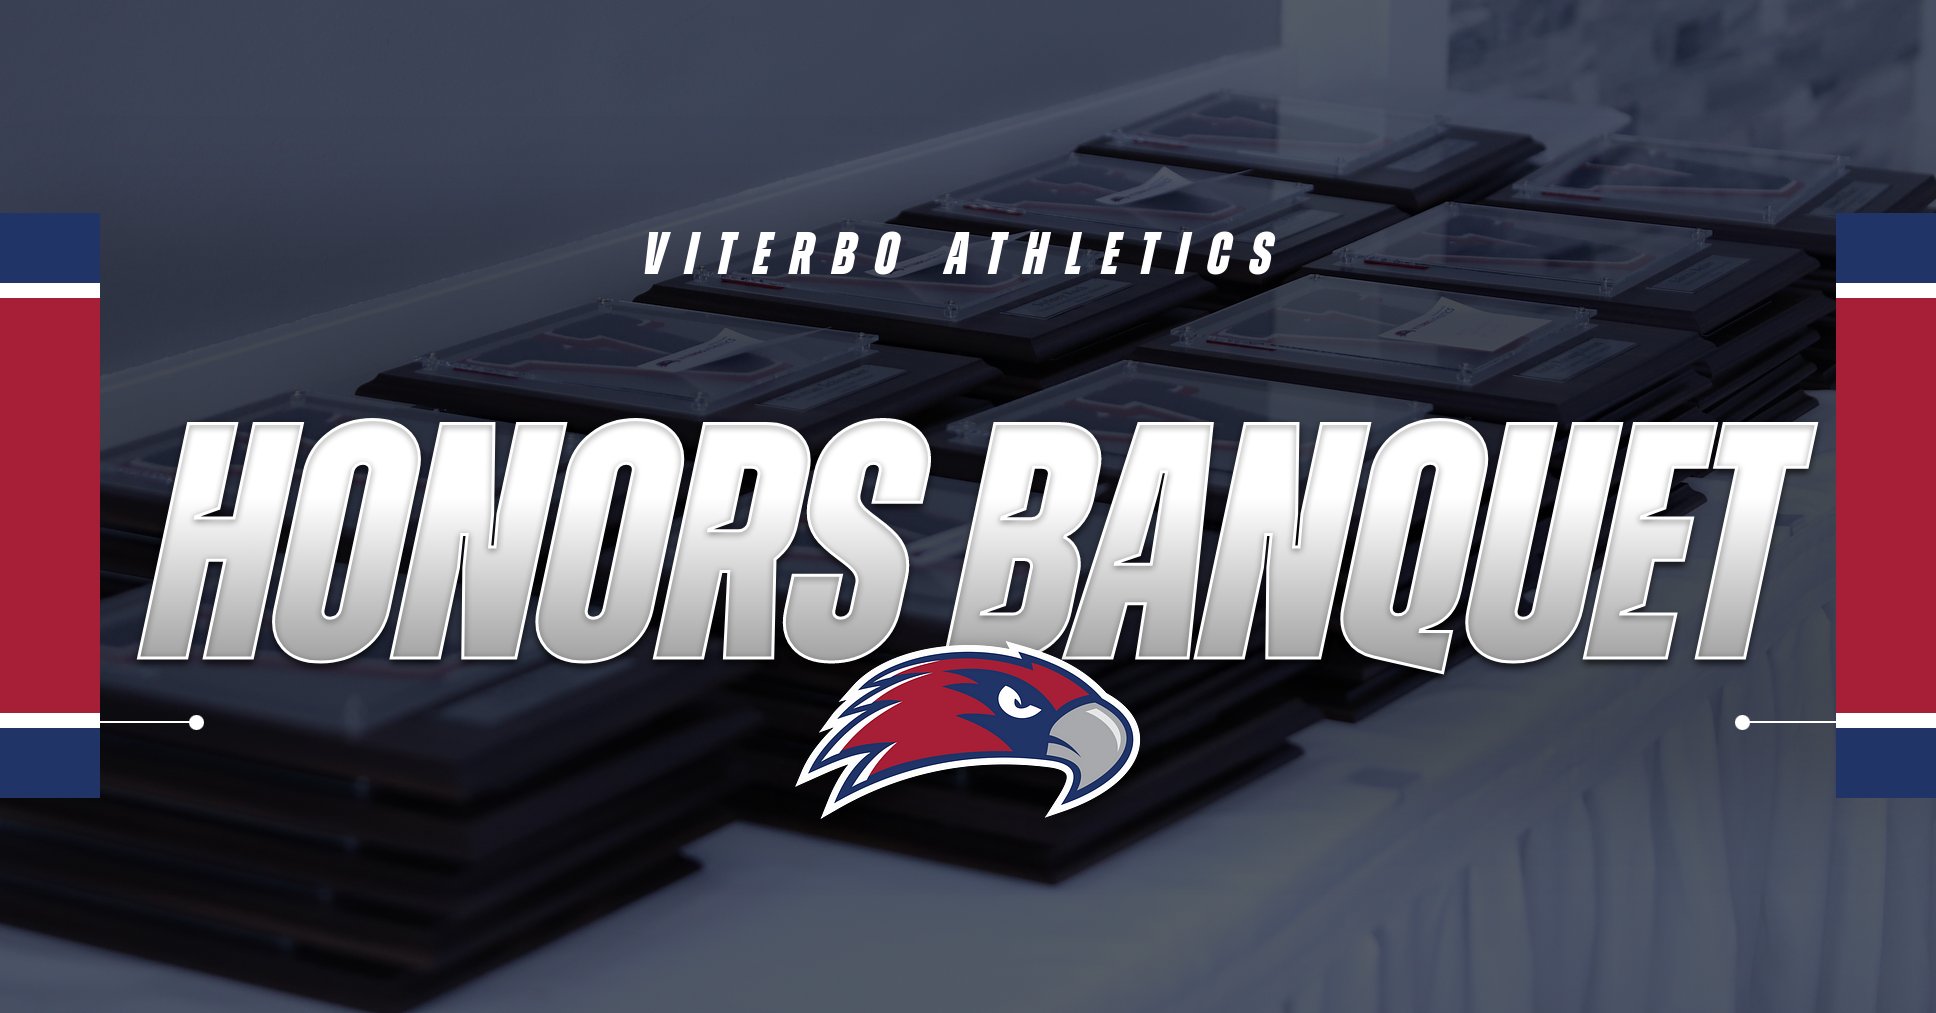 Viterbo Hosts Annual Athletics Honors Banquet